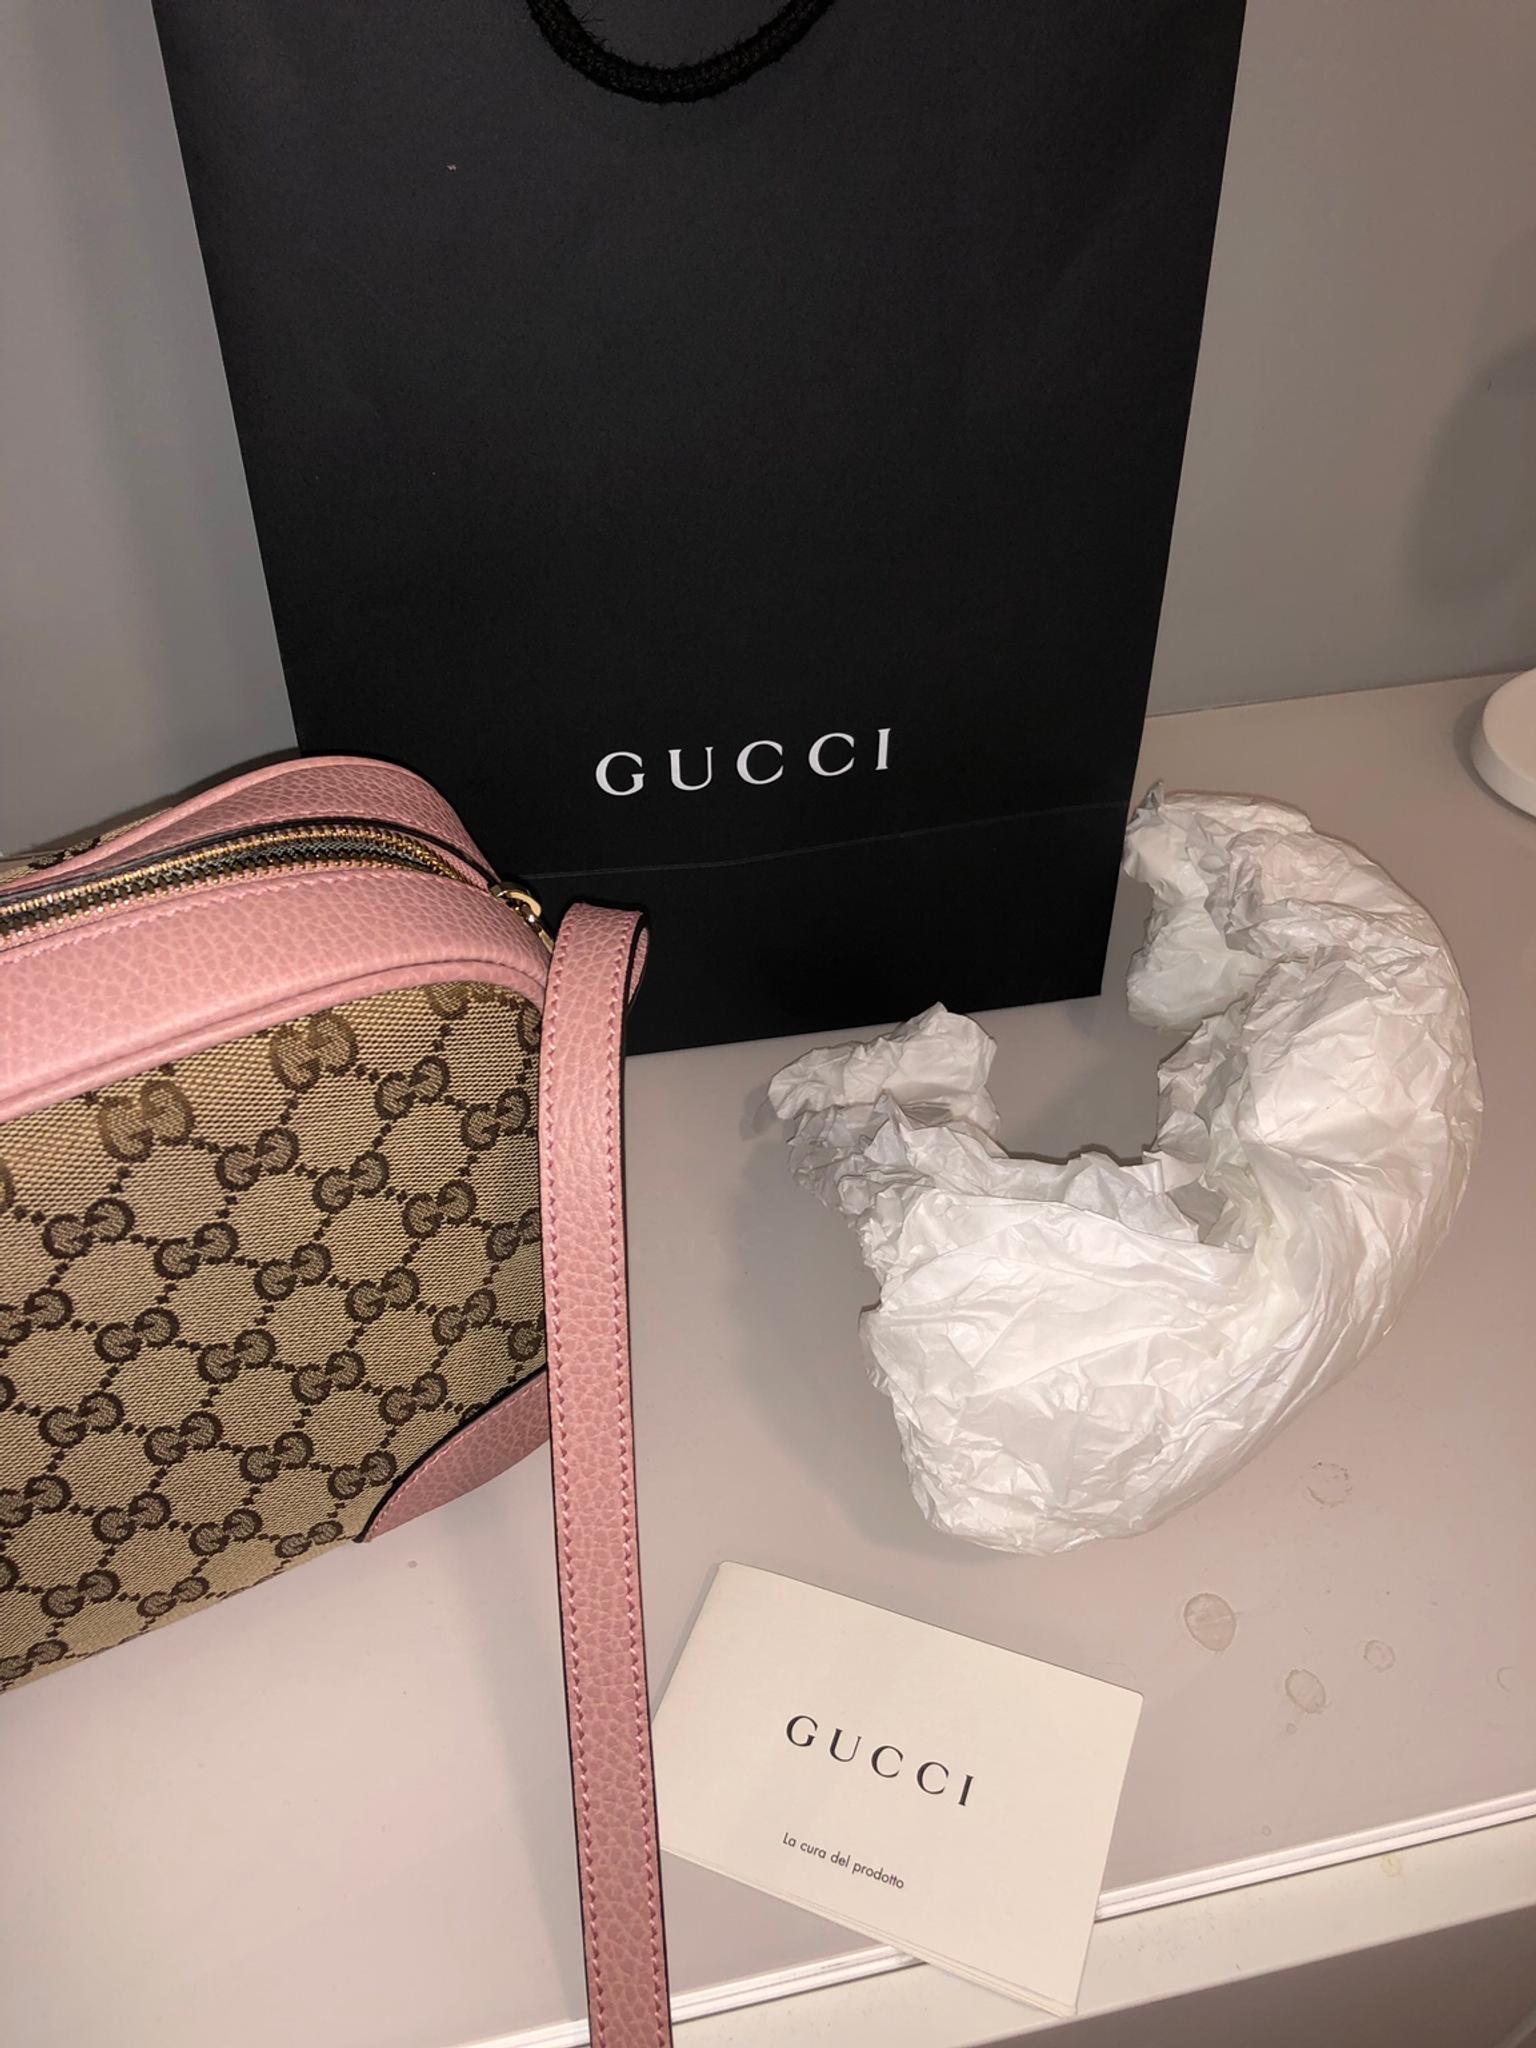 bicester gucci prices